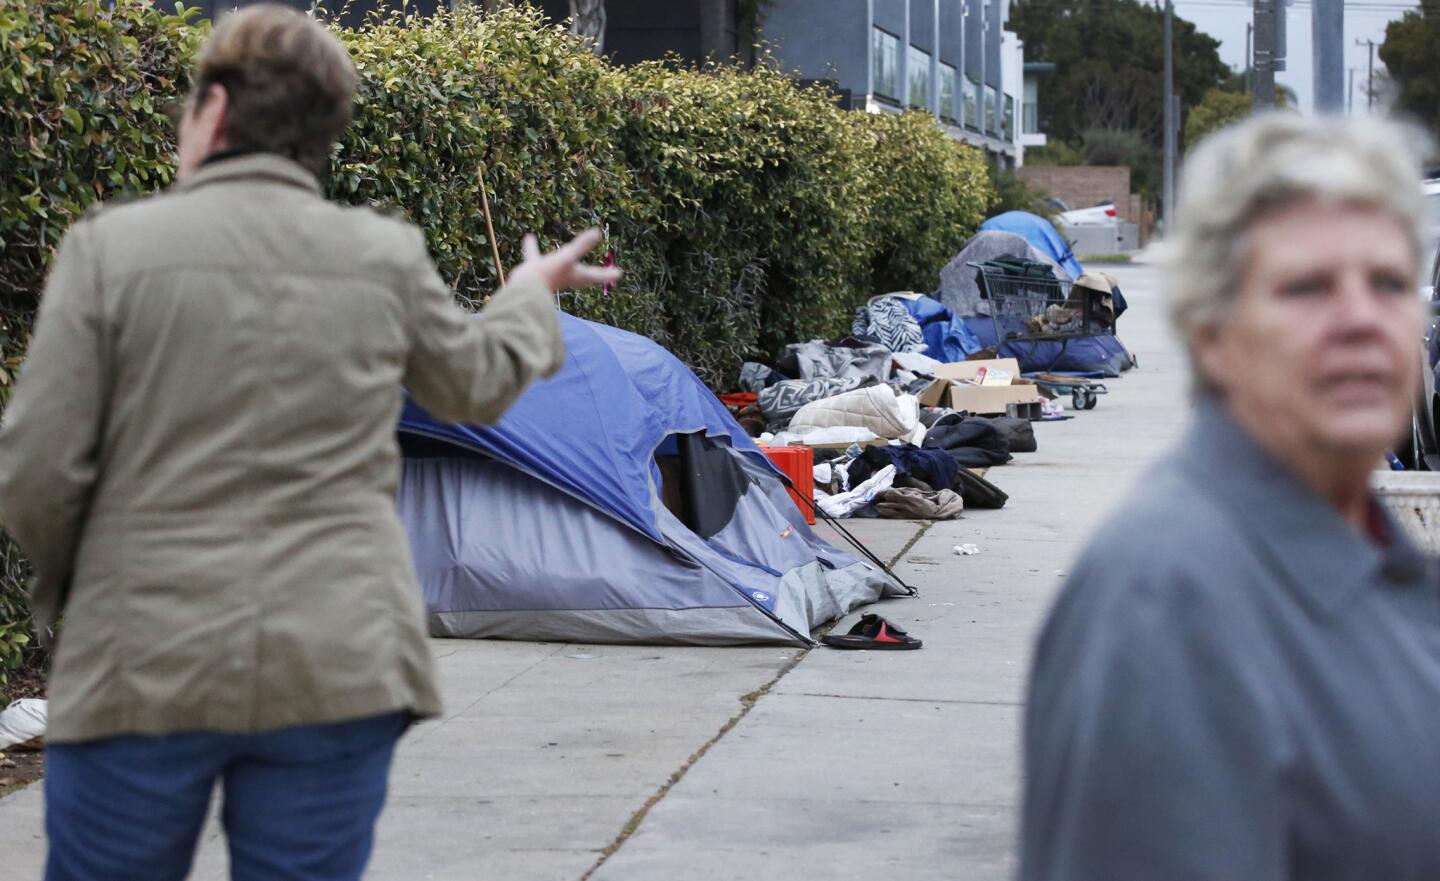 Venice residents hoping Measure H brings end to homeless camps